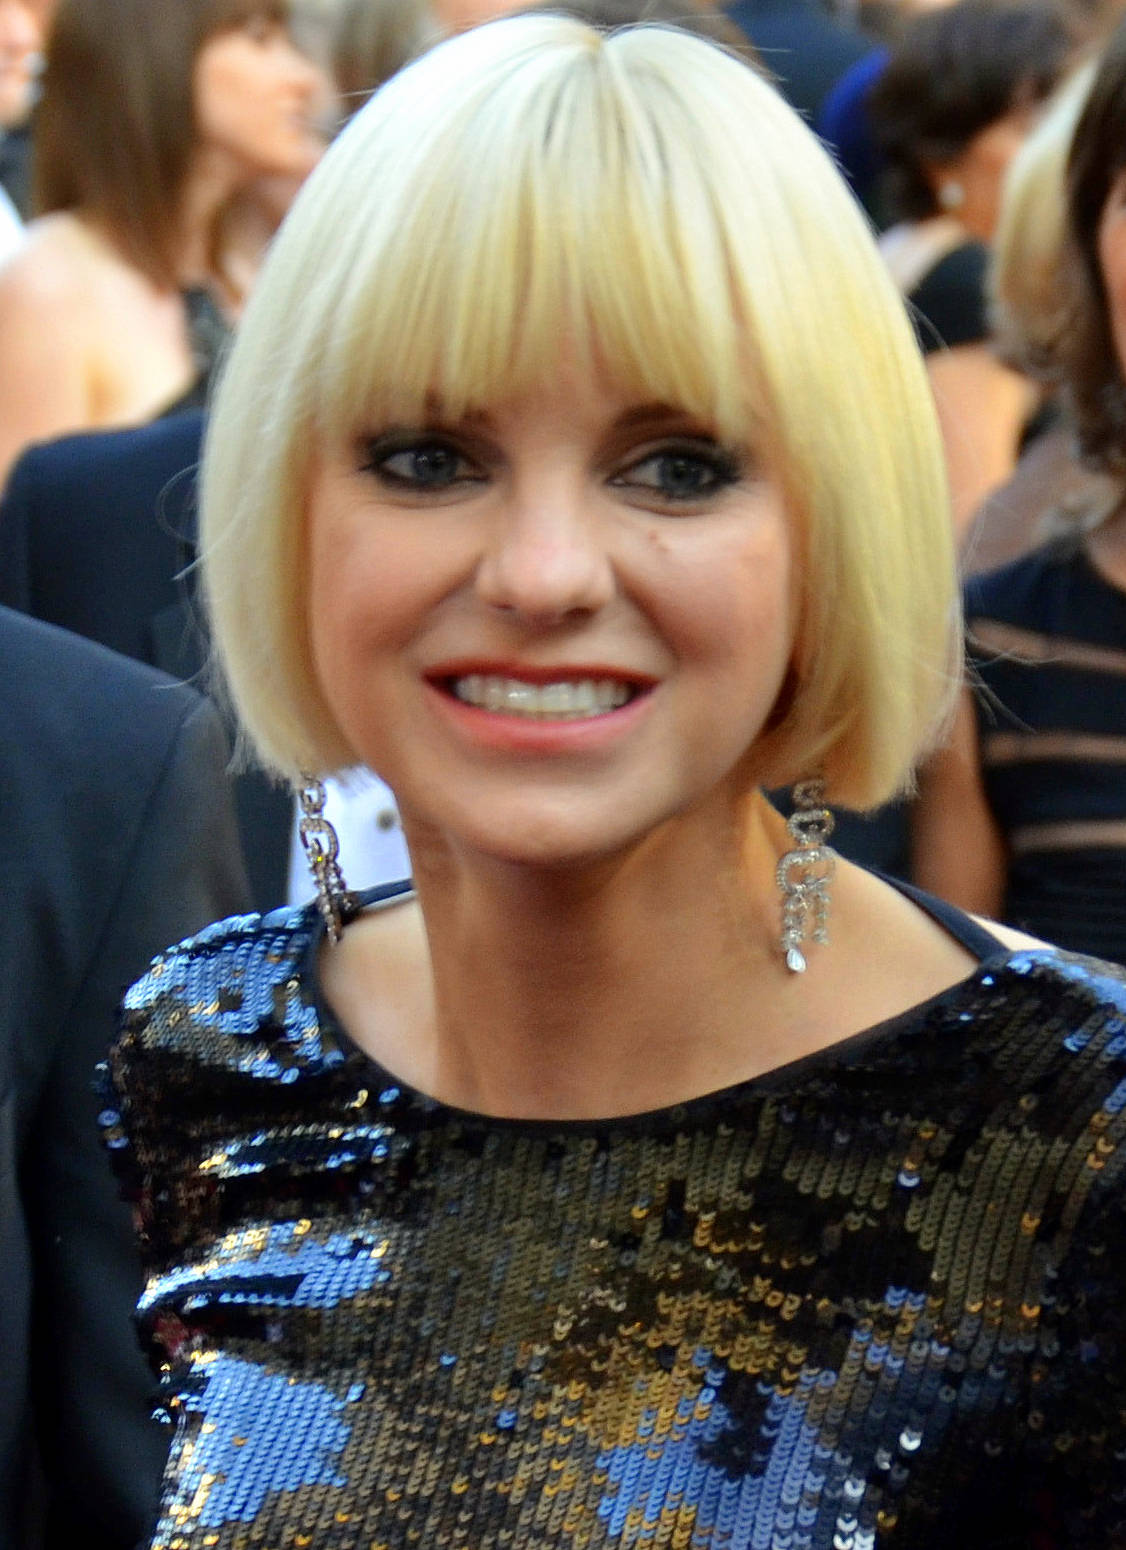 Oscars 2012 Red Carpet American Actress Anna Faris Background